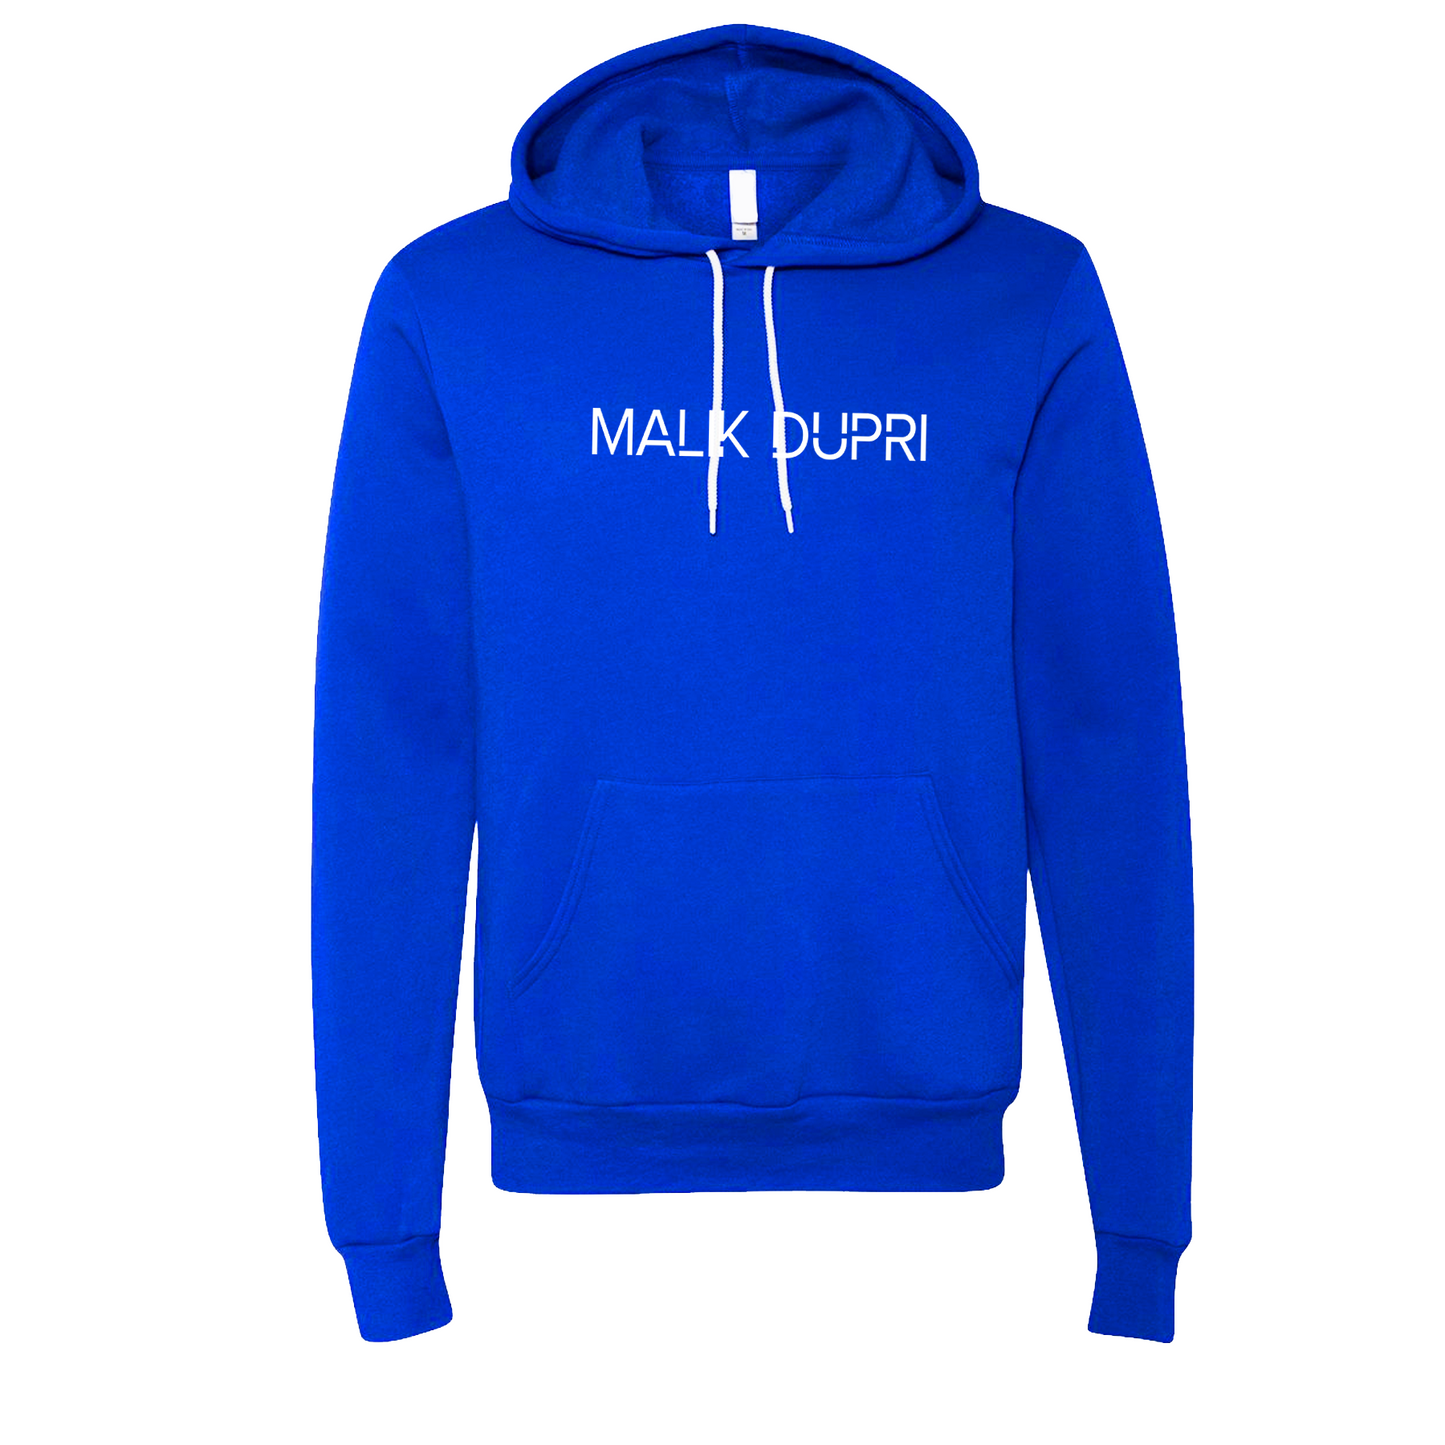 Blue French Terry Hoodie